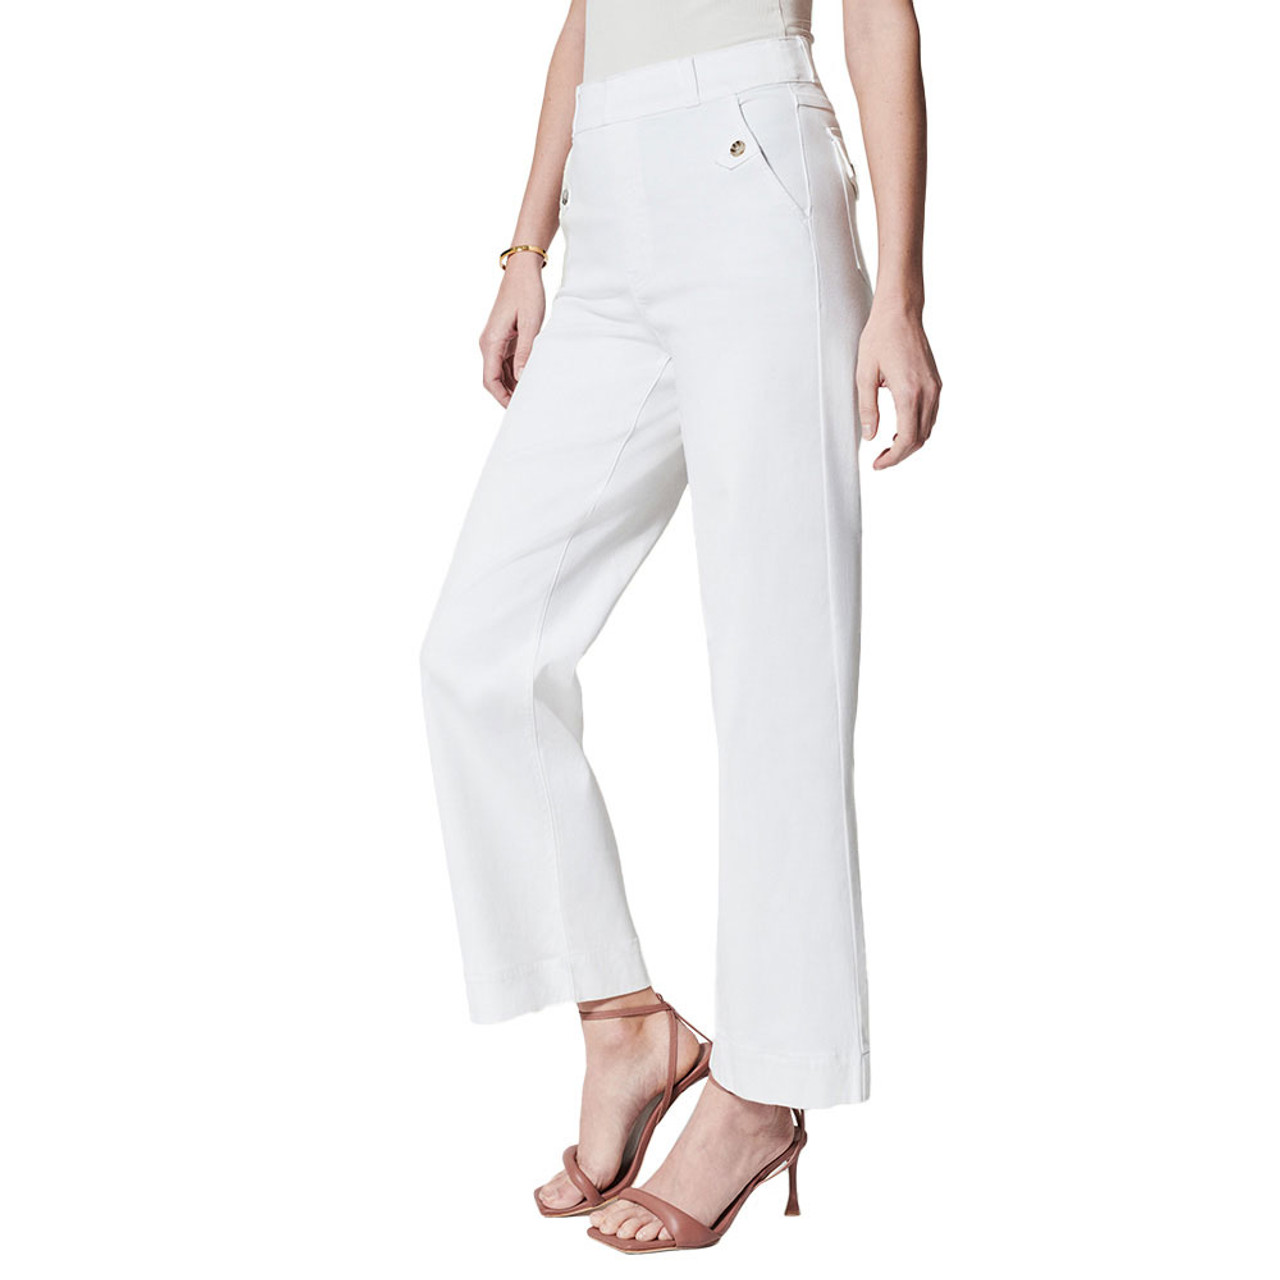 https://cdn11.bigcommerce.com/s-zut1msomd6/images/stencil/1280x1280/products/38653/248885/spanx-womens-twill-cropped-wide-leg-pant-20312r-brwht-bright-white-main__63701.1709141624.jpg?c=1